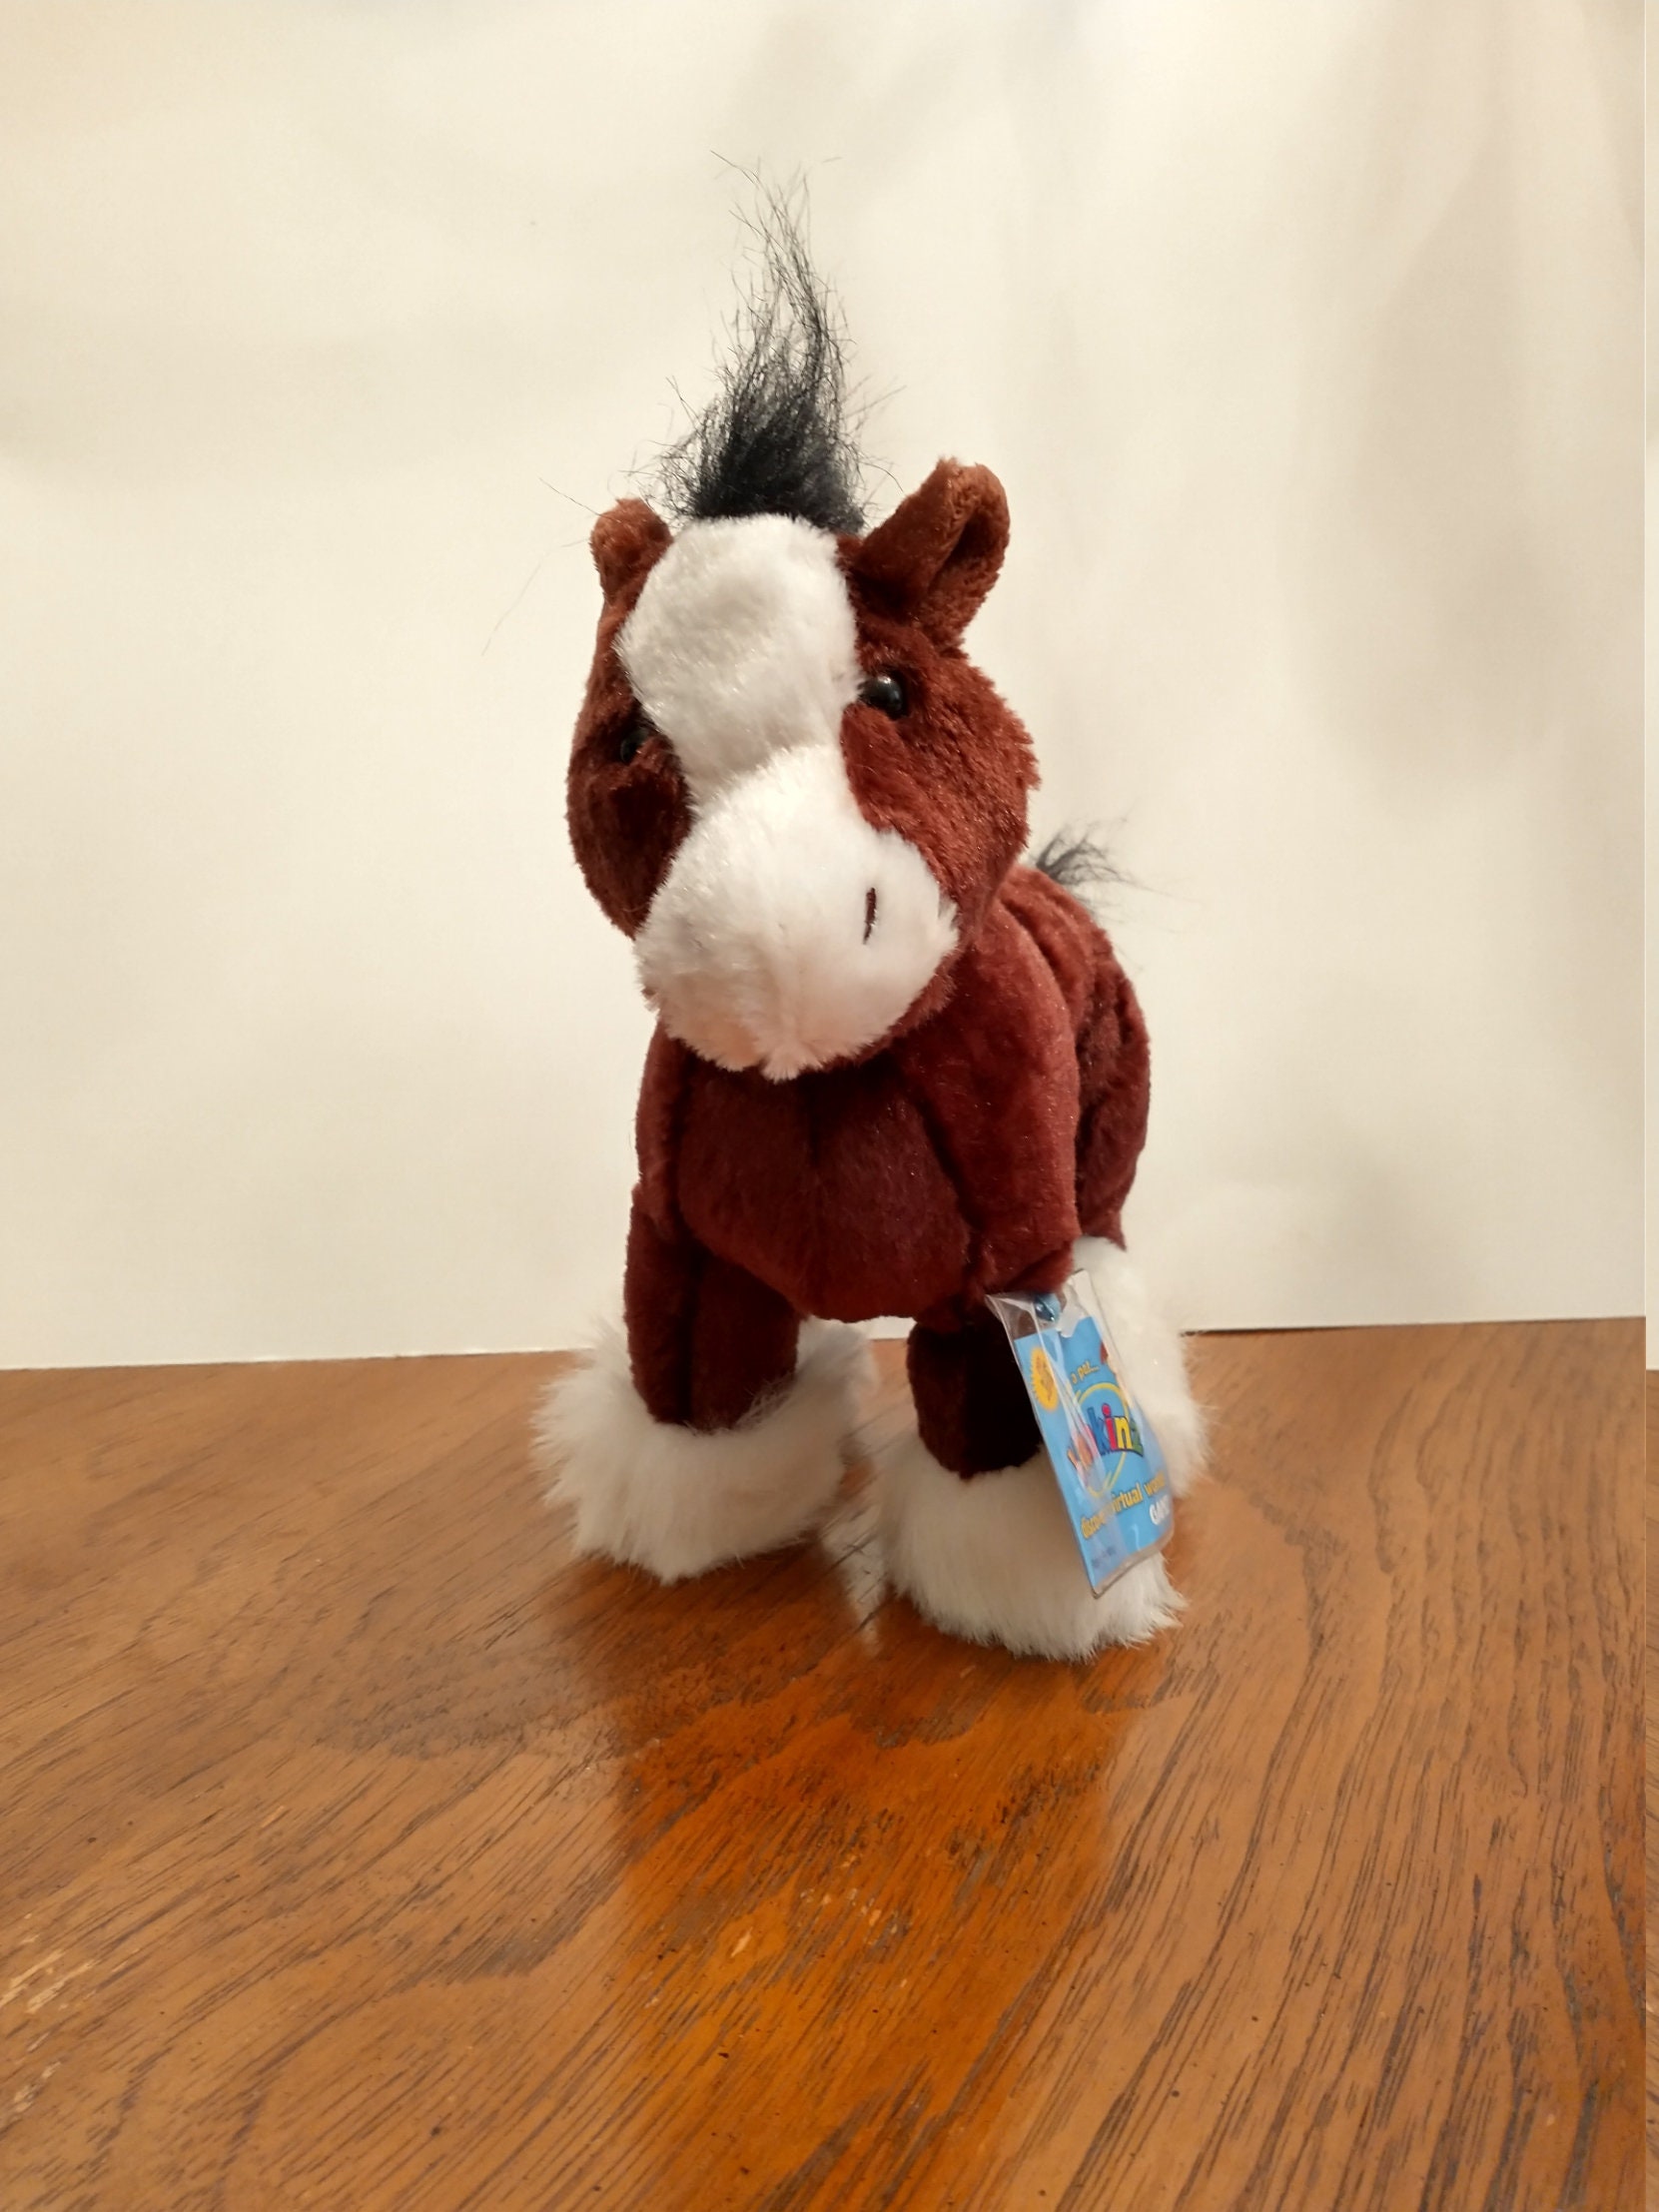 Webkinz Clydesdale Plush Horse Brown White HM139 GANZ Code for sale online 